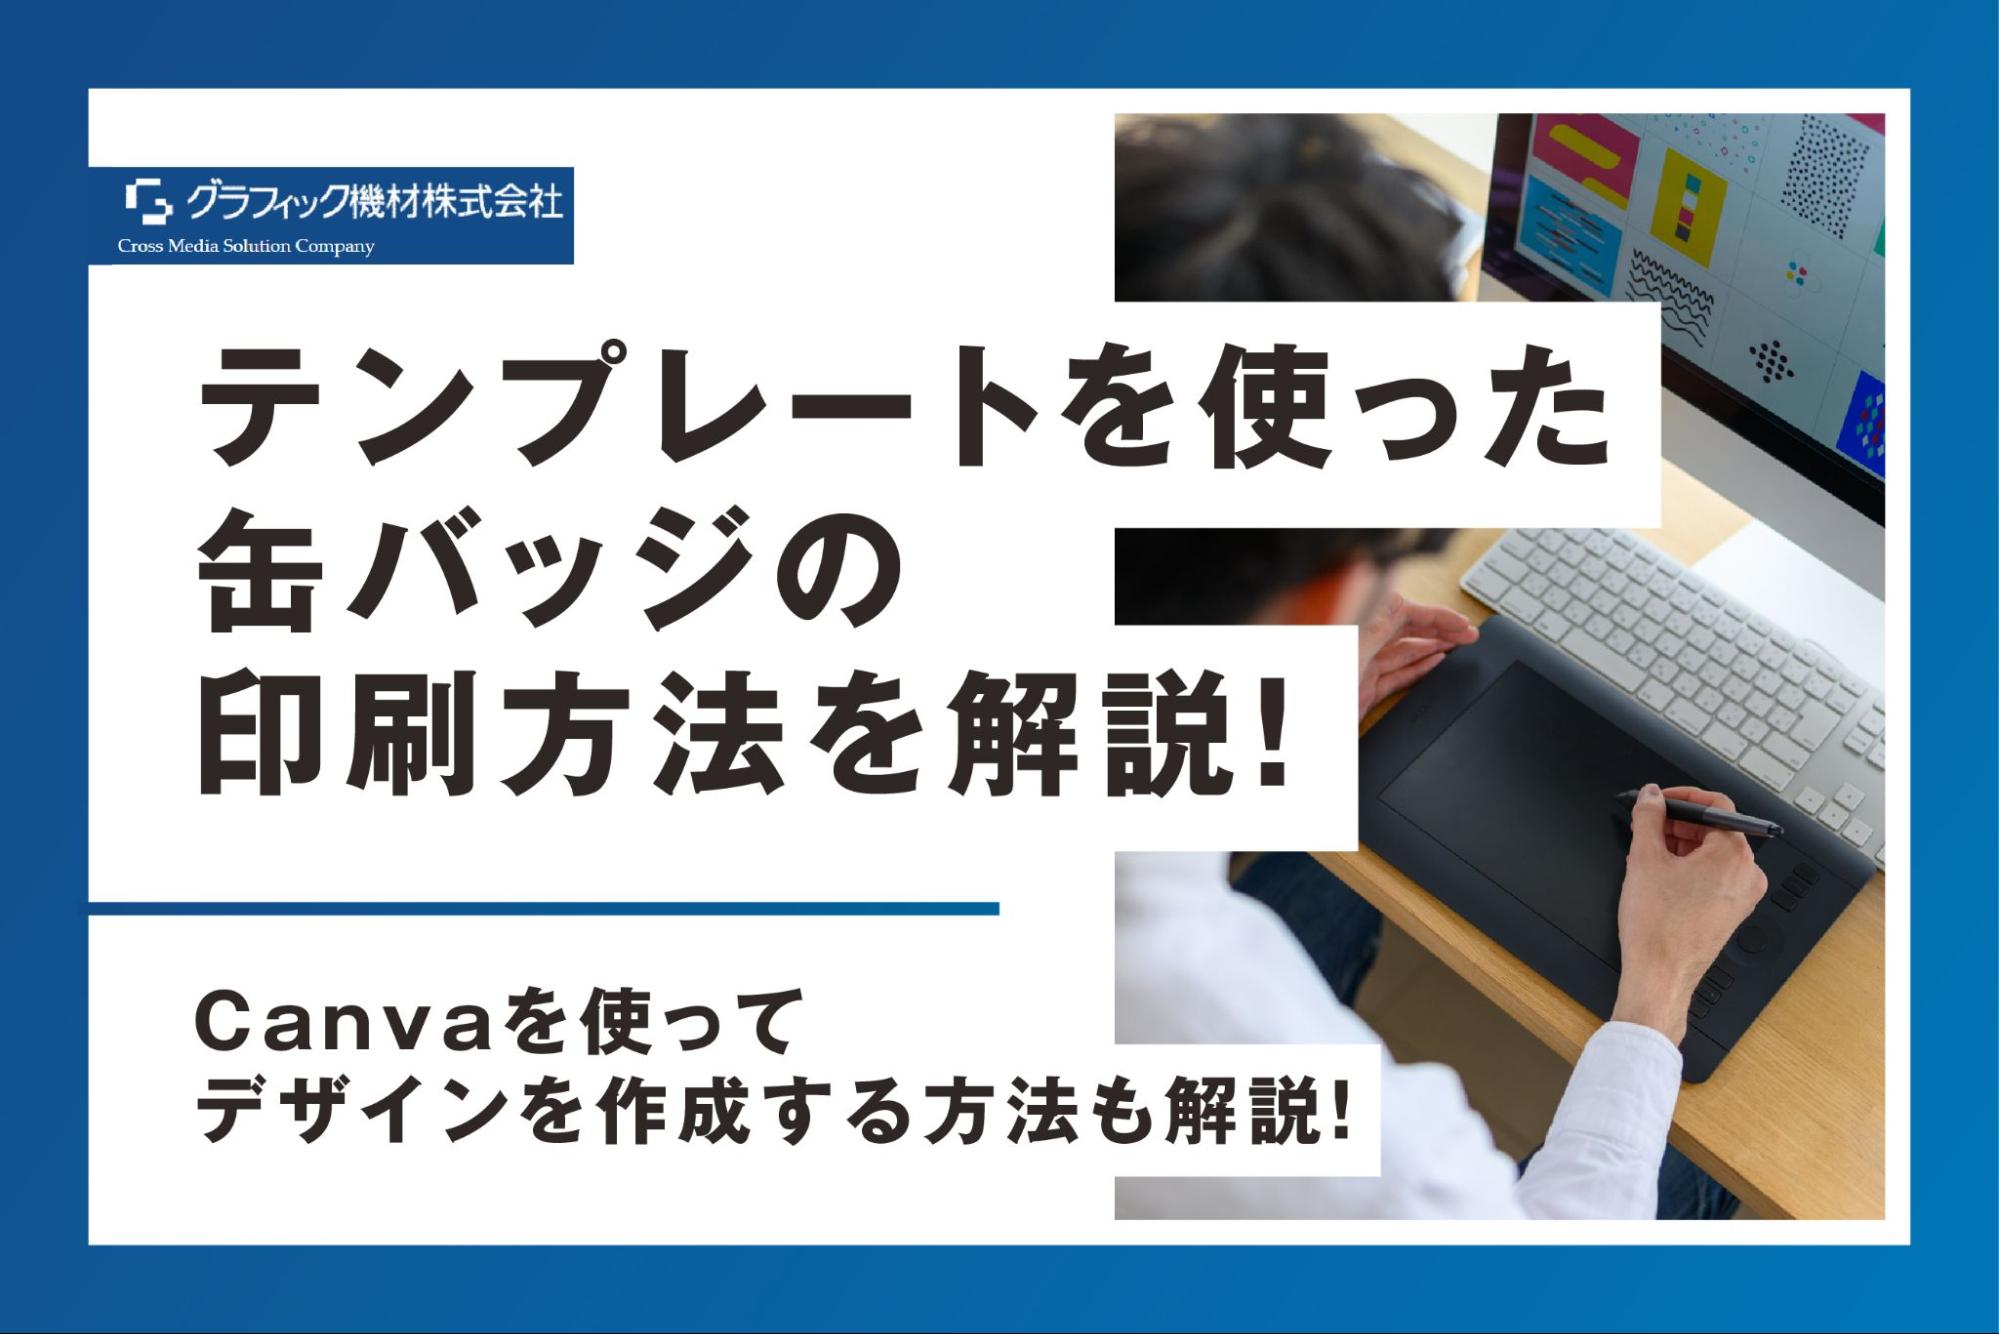 You are currently viewing テンプレートを使った缶バッジの印刷方法を解説！Canvaを使ってデザインを作成する方法も解説！